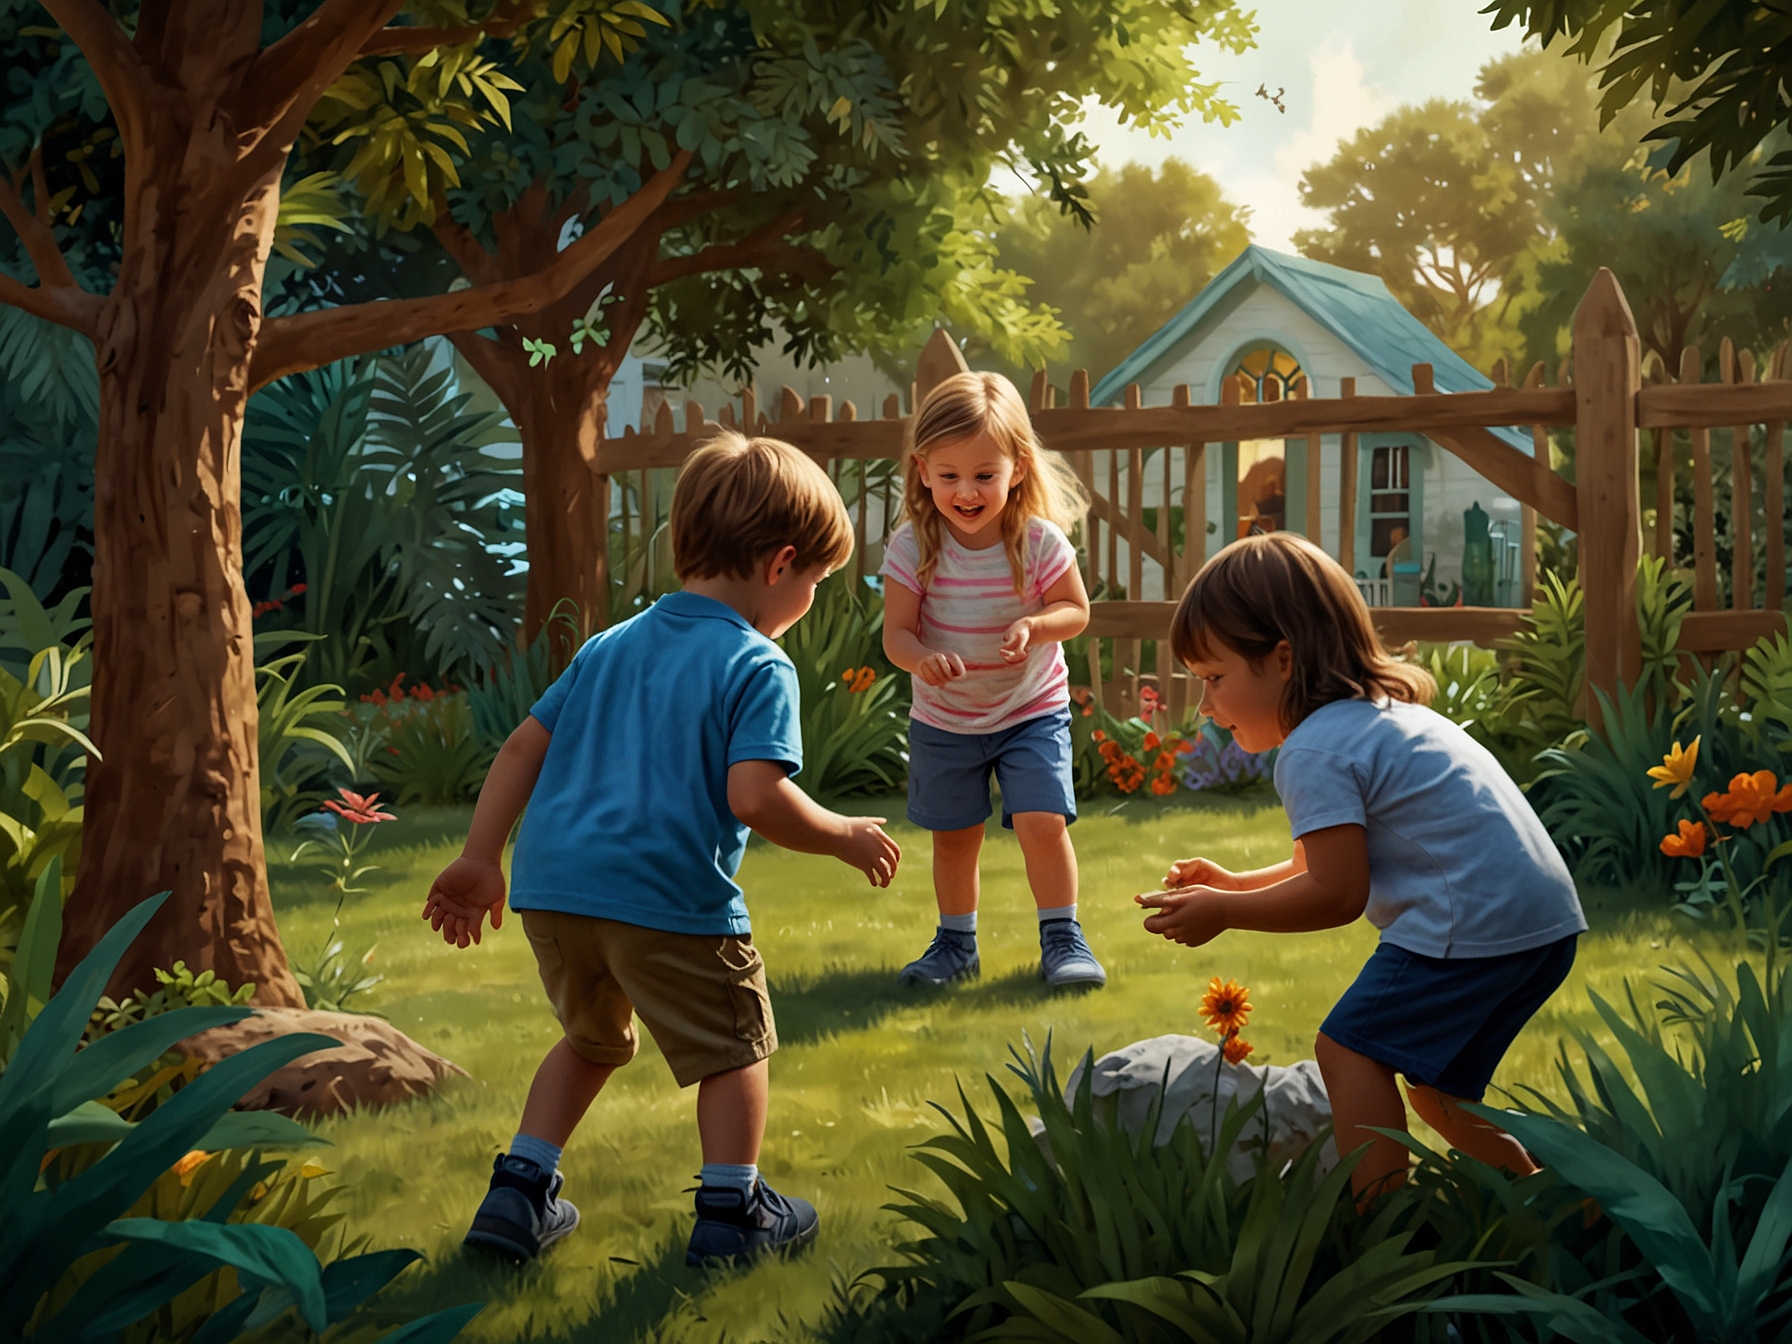 Children, led by Crew Gaines' siblings, search for hidden 'dino eggs' in a joyful scavenger hunt. The garden is alive with excitement, showcasing the event's thoughtful and creative design.